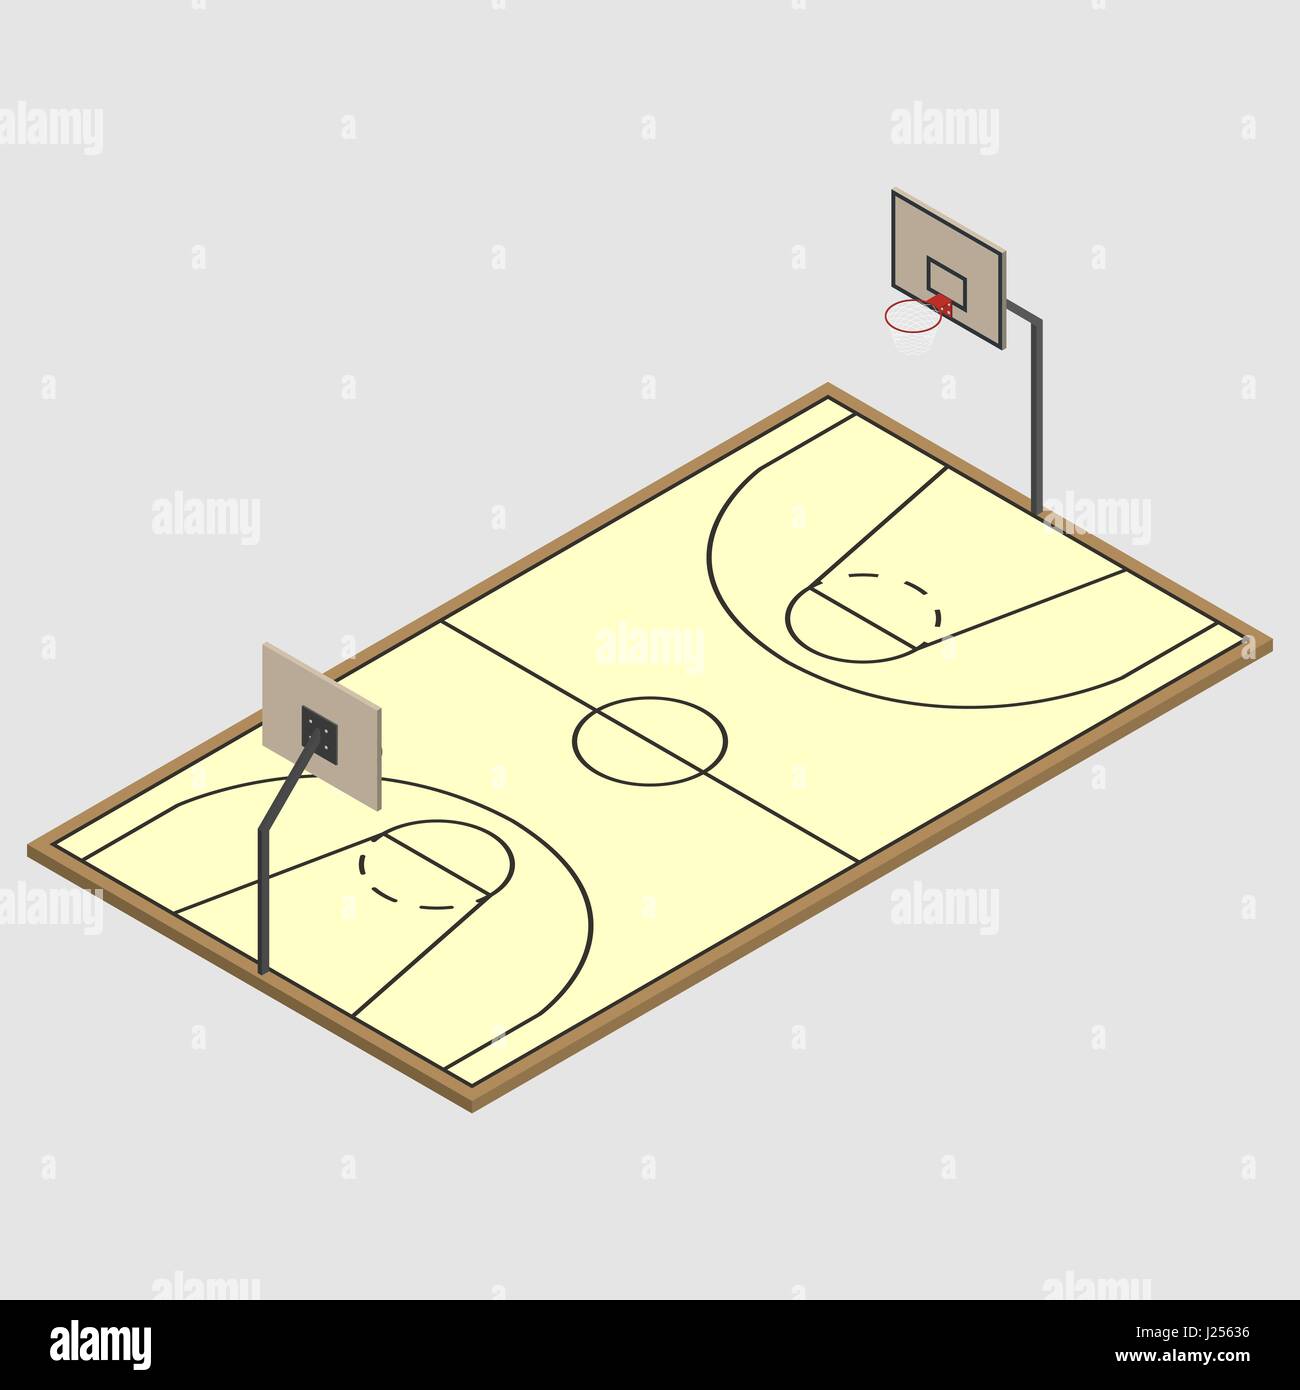 Field for play basketball with a markings and basket, isolated on white background. Element design of playgrounds. Flat 3D isometric style, vector ill Stock Vector